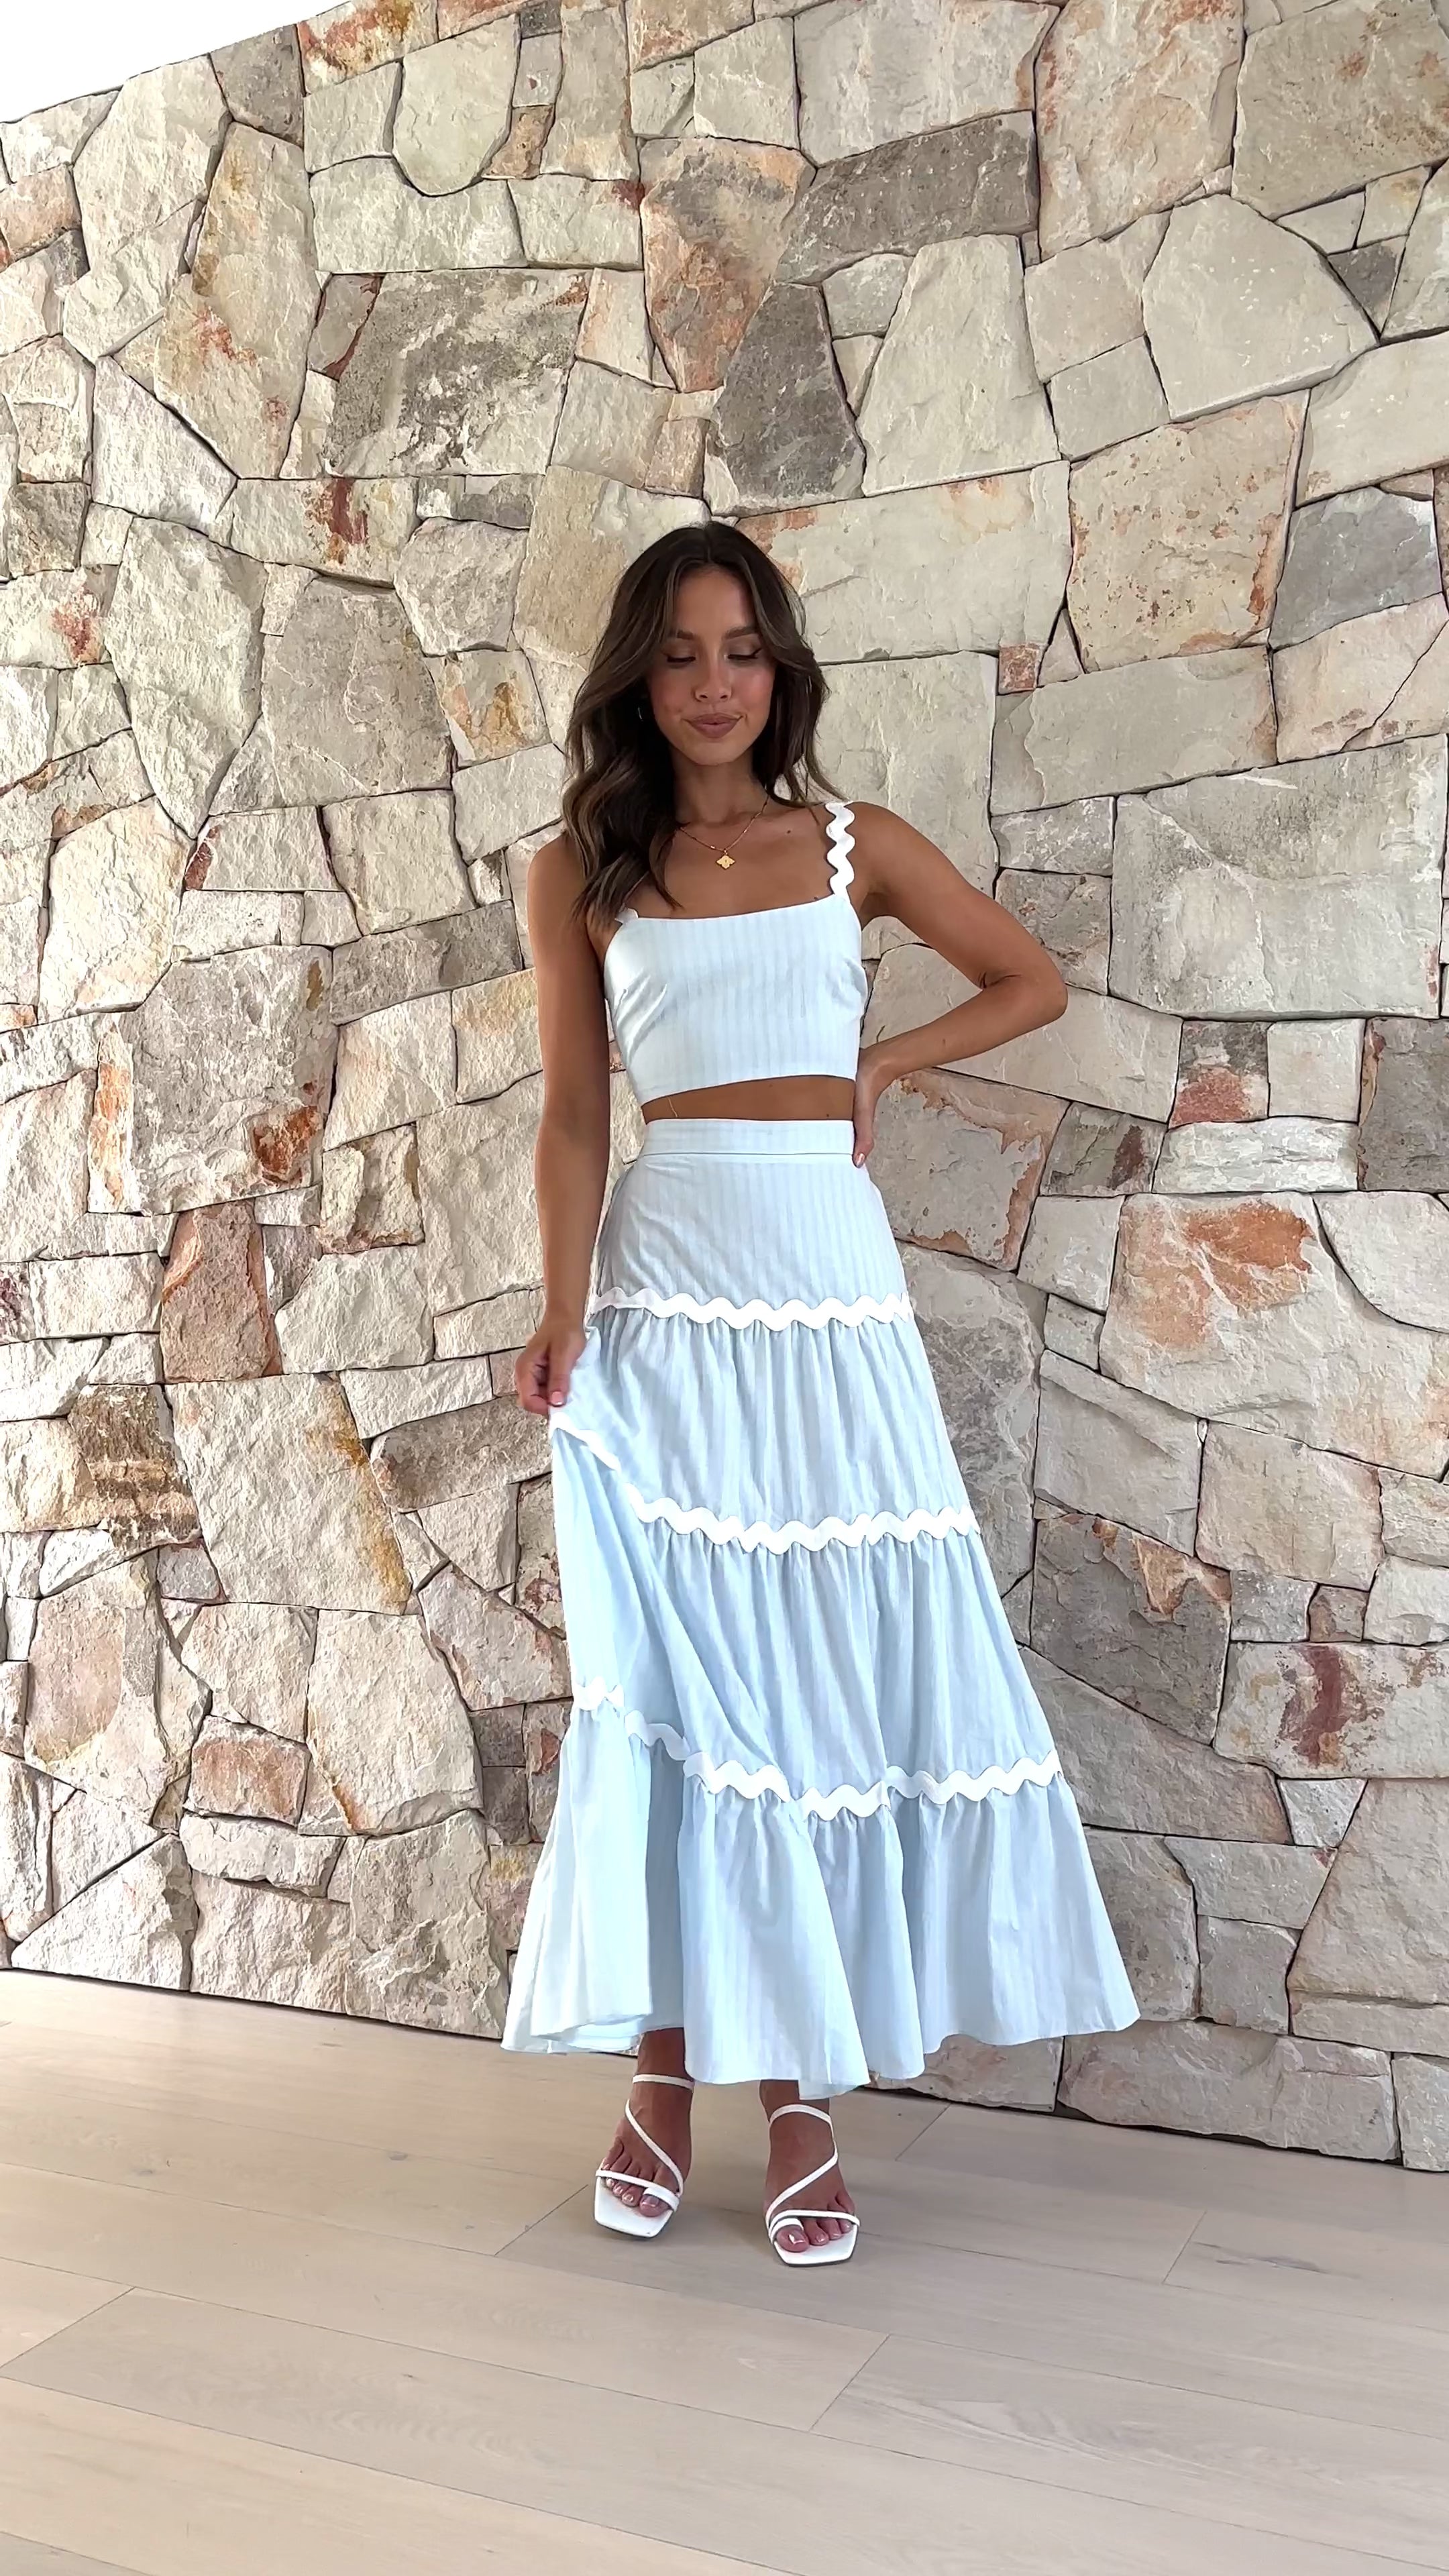 Lys Top and Maxi Skirt Set - Blue / White